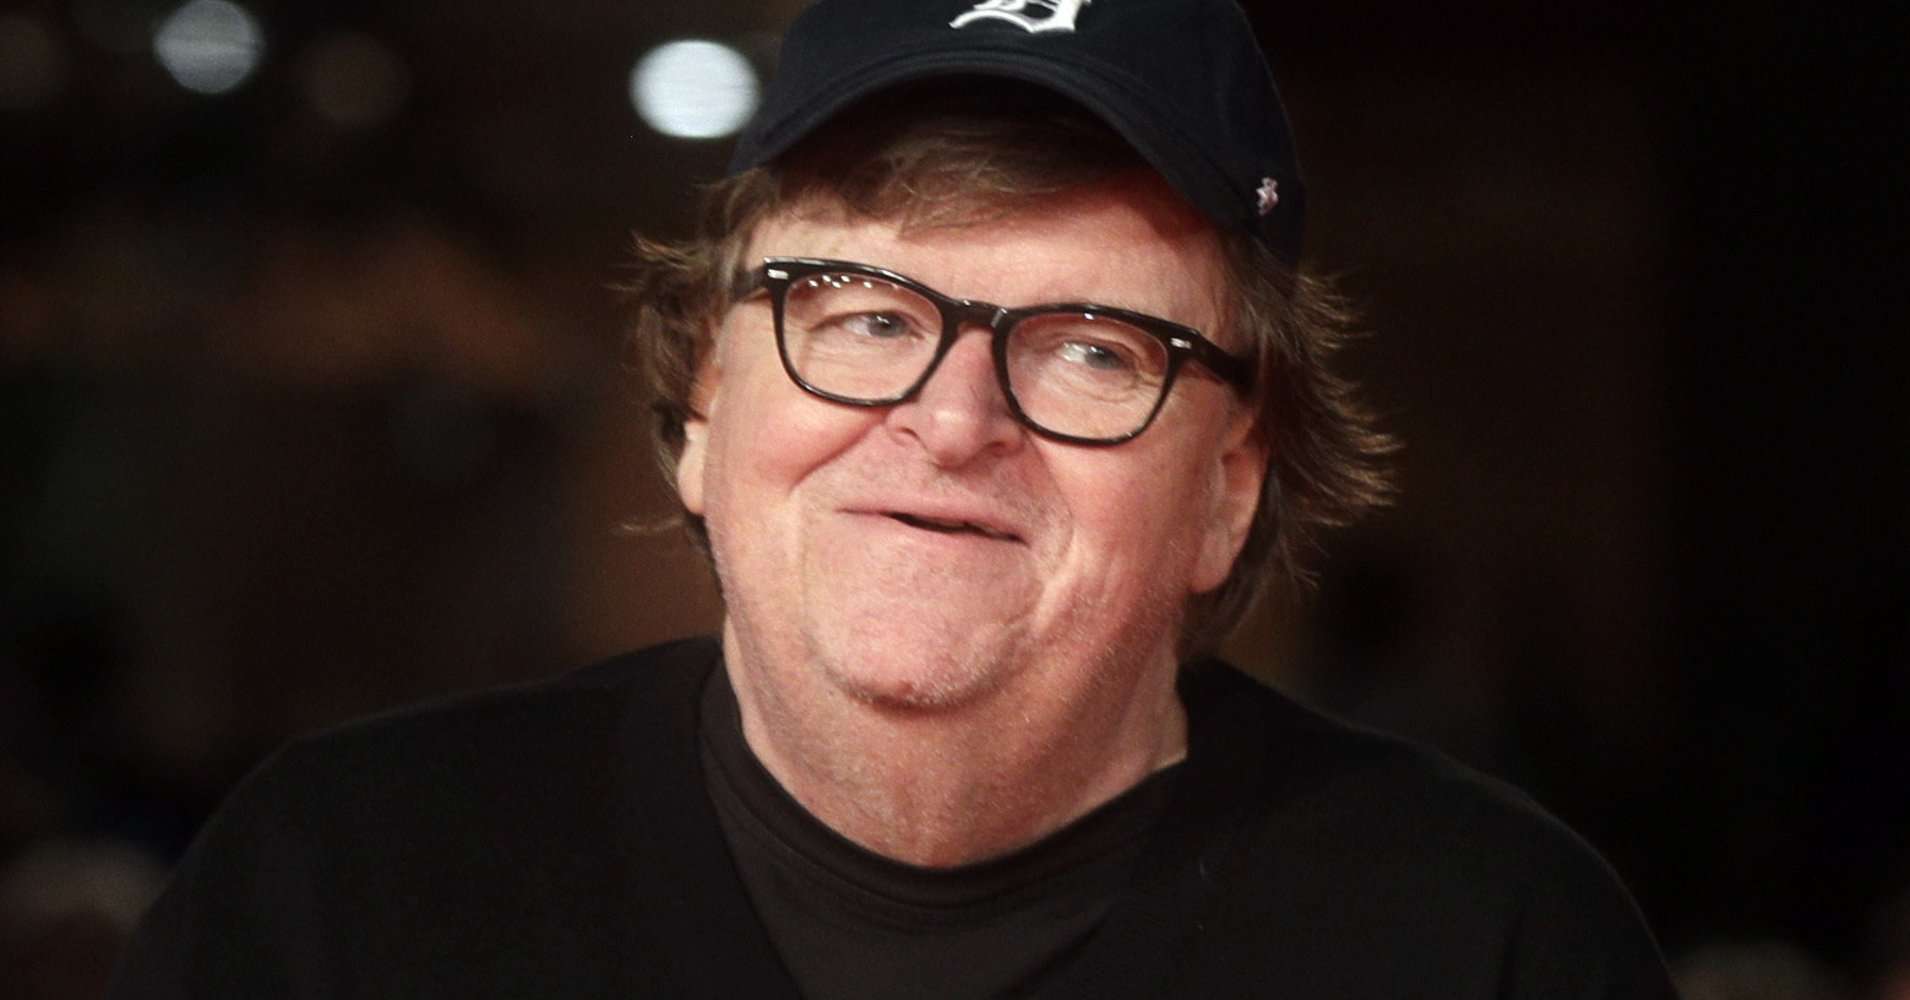 image for Michael Moore: Fox News Helped Create Generation Of 'Violent Conspiracy Theorists’